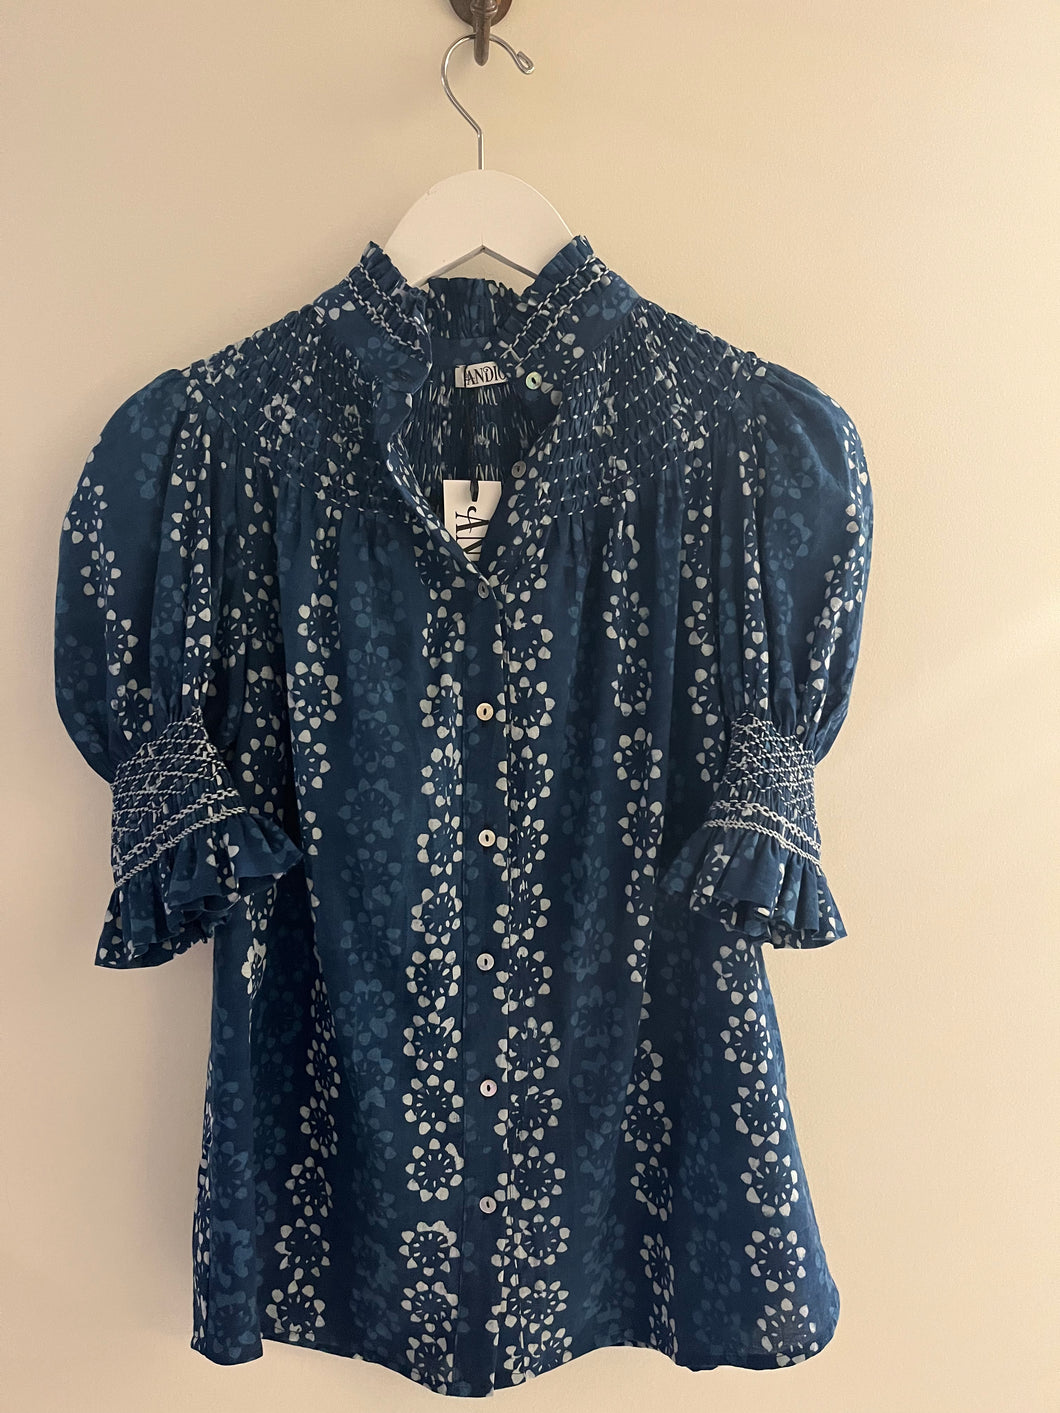 Andion Amelia Blouse in Navy Floral